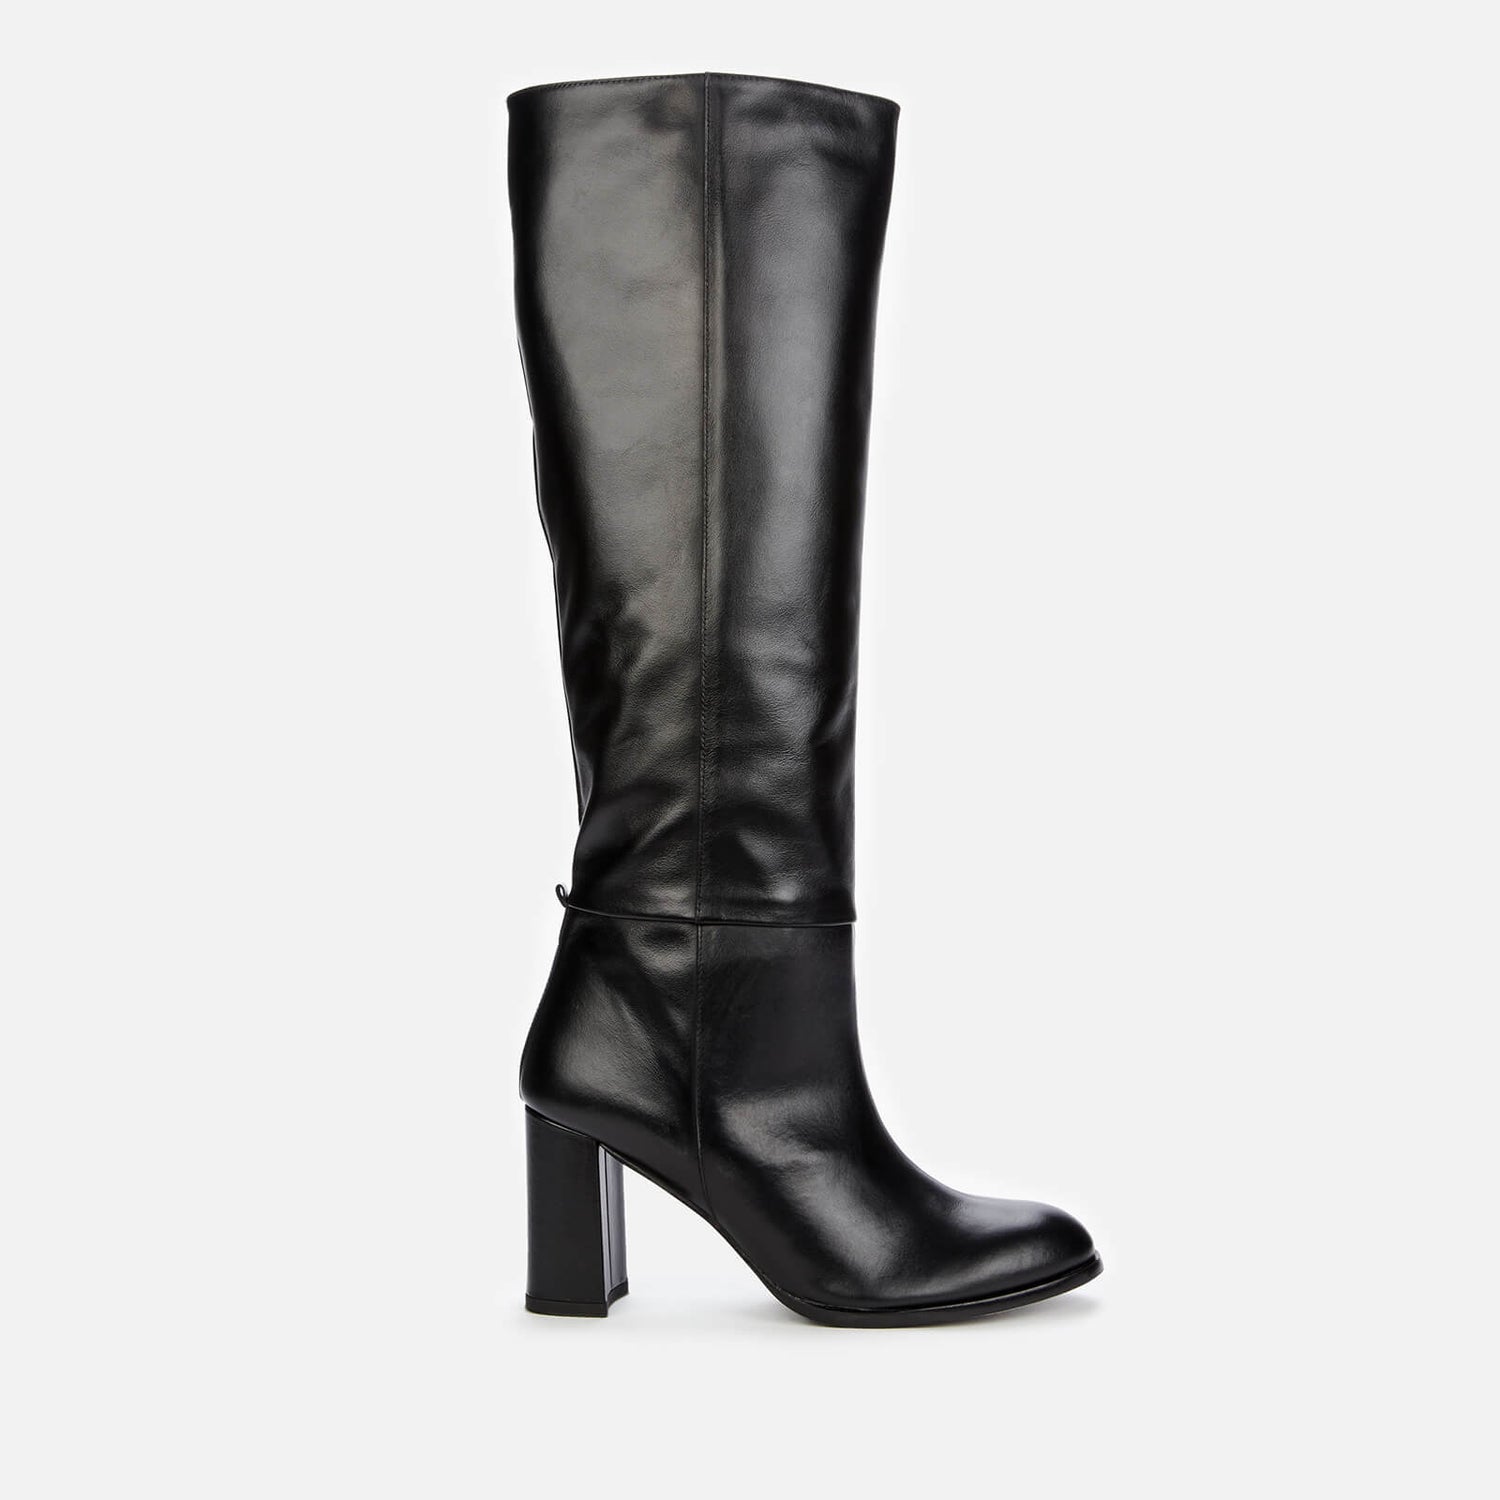 Whistles Women's High Heeled Leather Knee High Boots - Black